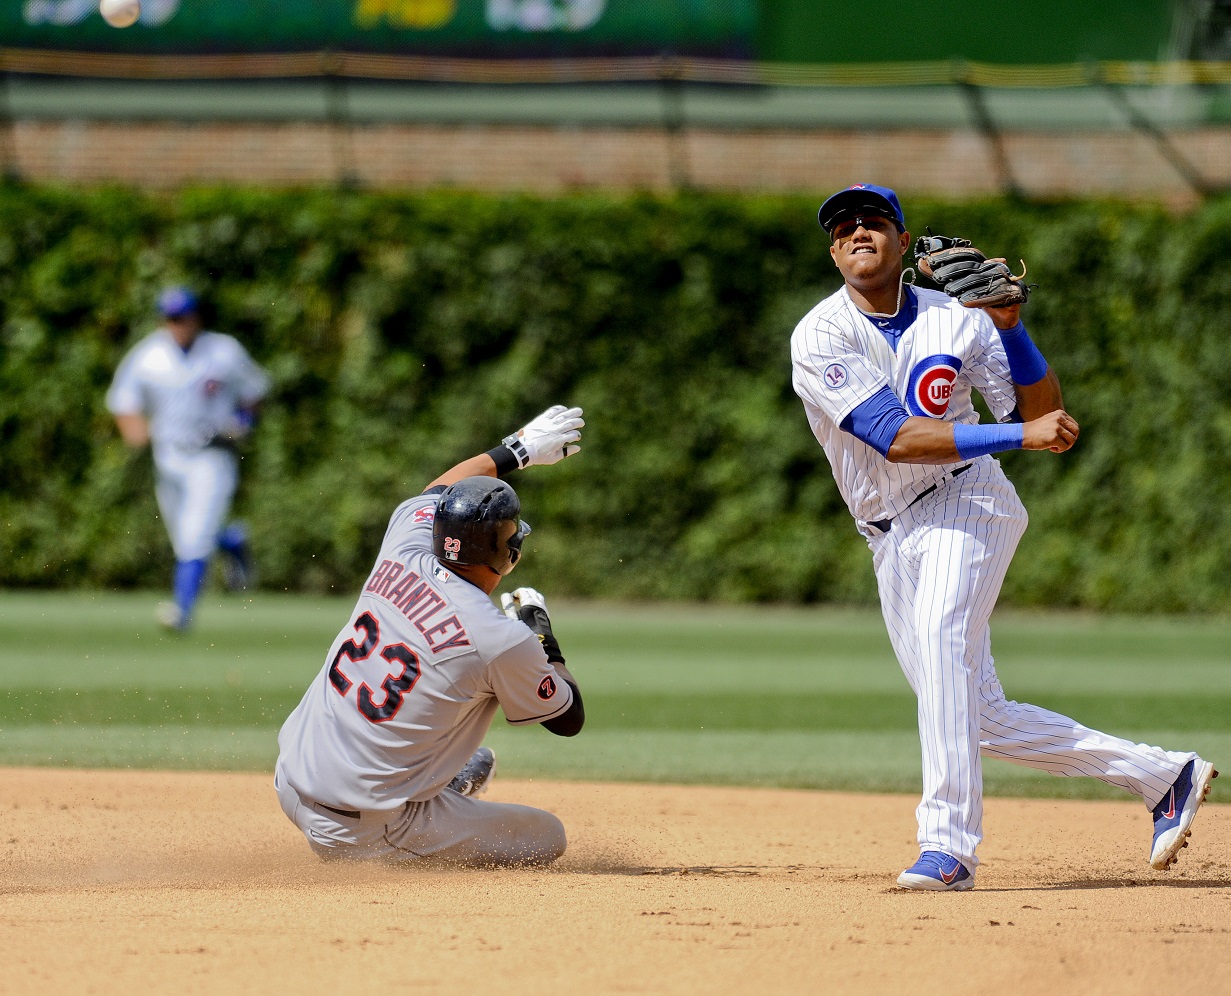 Chicago Cubs shortstop Starlin Castro (13) completes a double play after forcing Cleveland Indians' Michael Brantley (23) out at second base during the seventh inning of a baseball game  on Monday, Aug. 24, 2015, in Chicago. (AP Photo/Matt Marton)